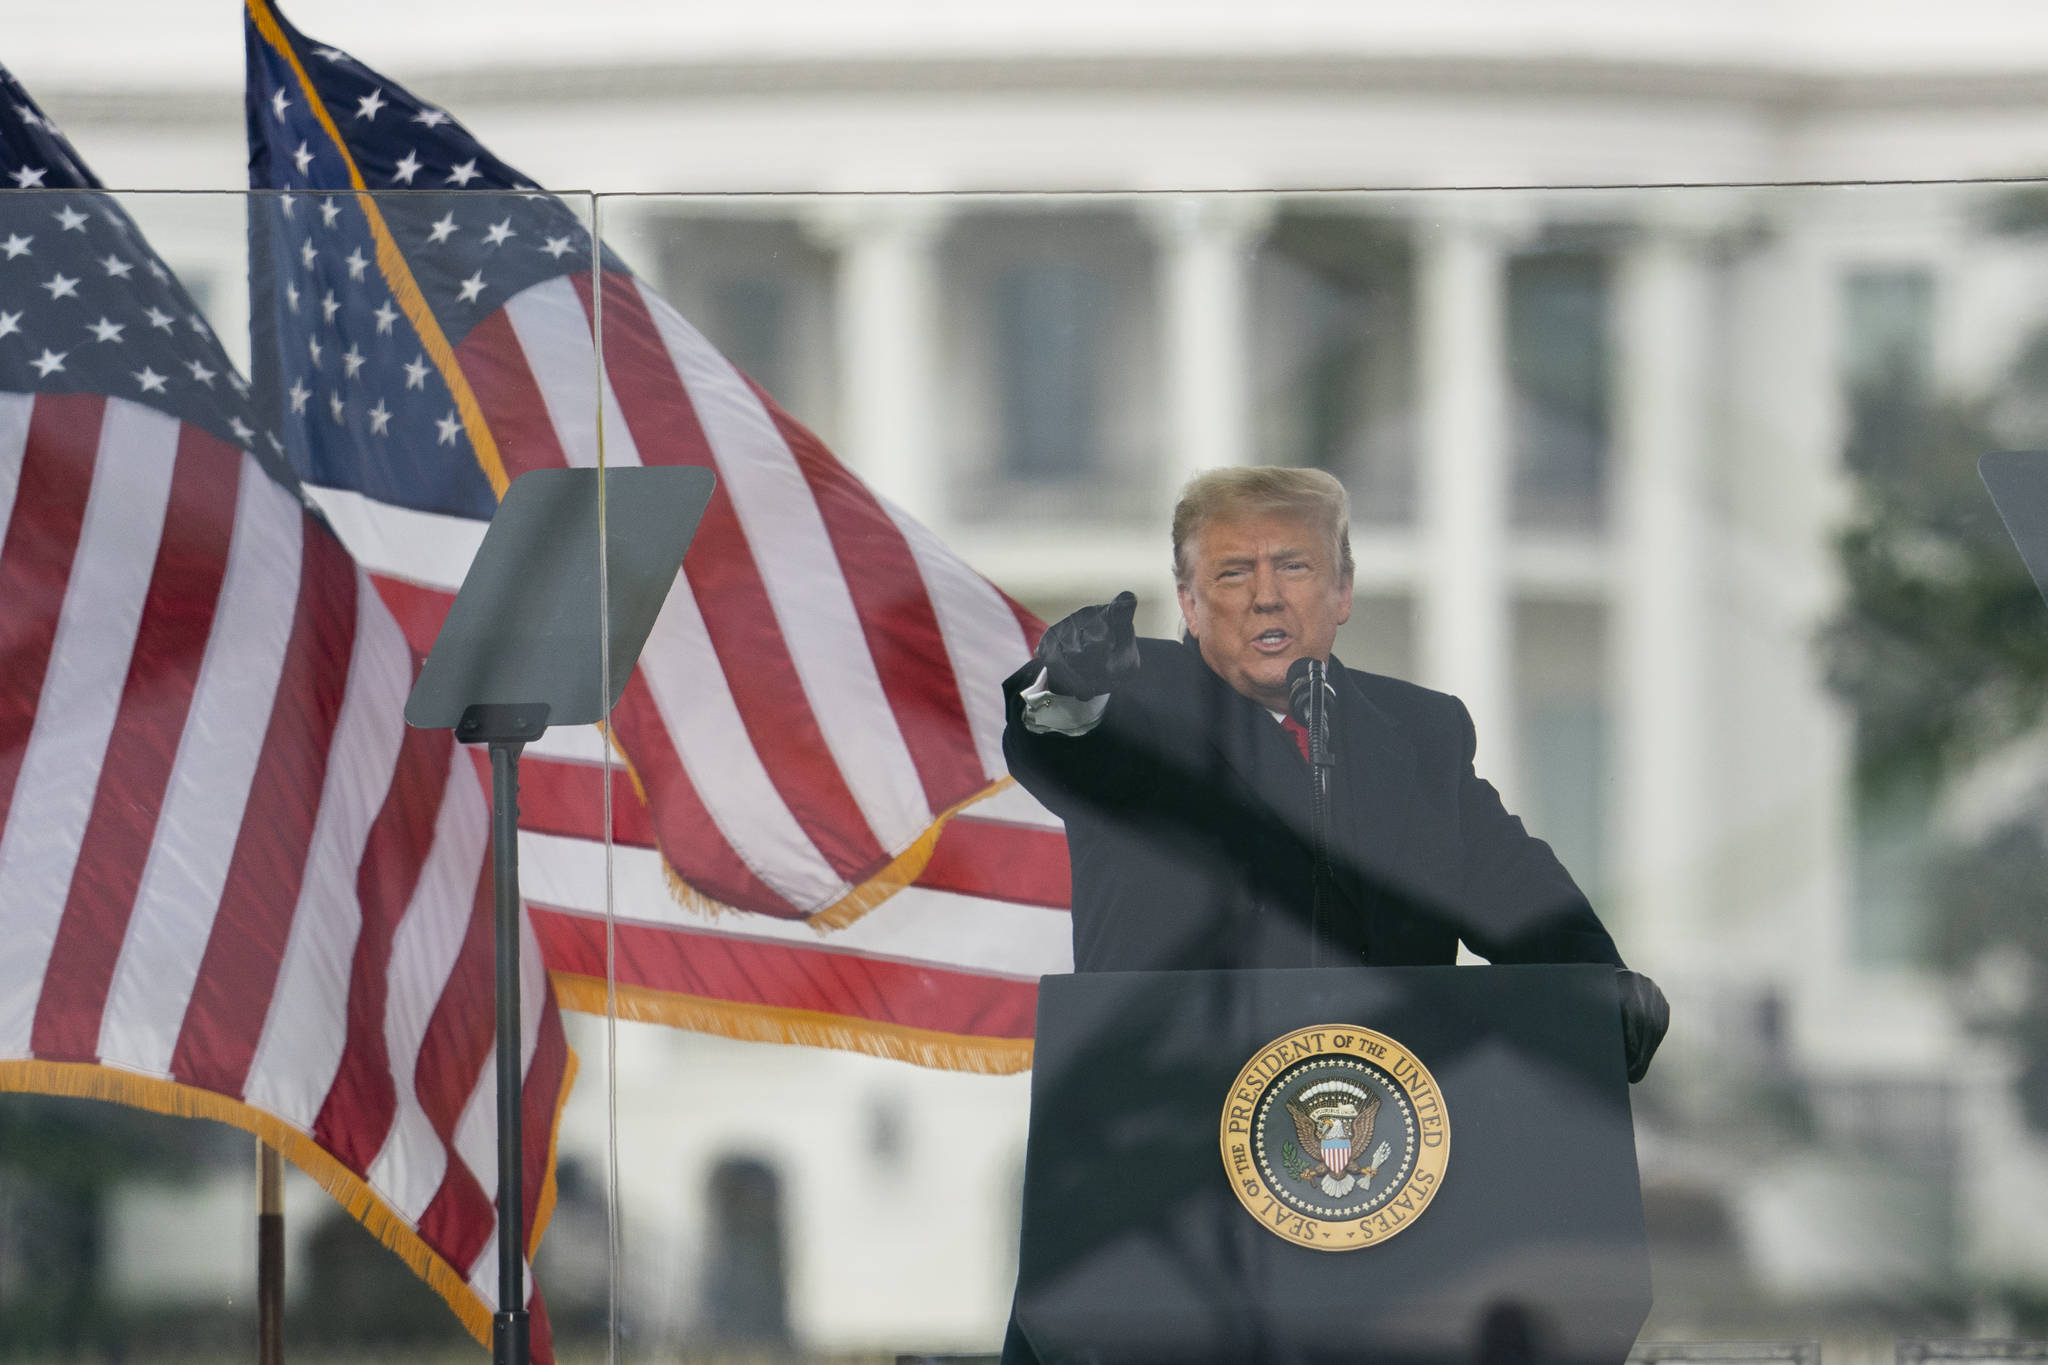 President Donald Trump speaks during a rally protesting the electoral college certification of Joe Biden as President, Wednesday, Jan. 6, 2021, in Washington. (AP Photo / Evan Vucci)